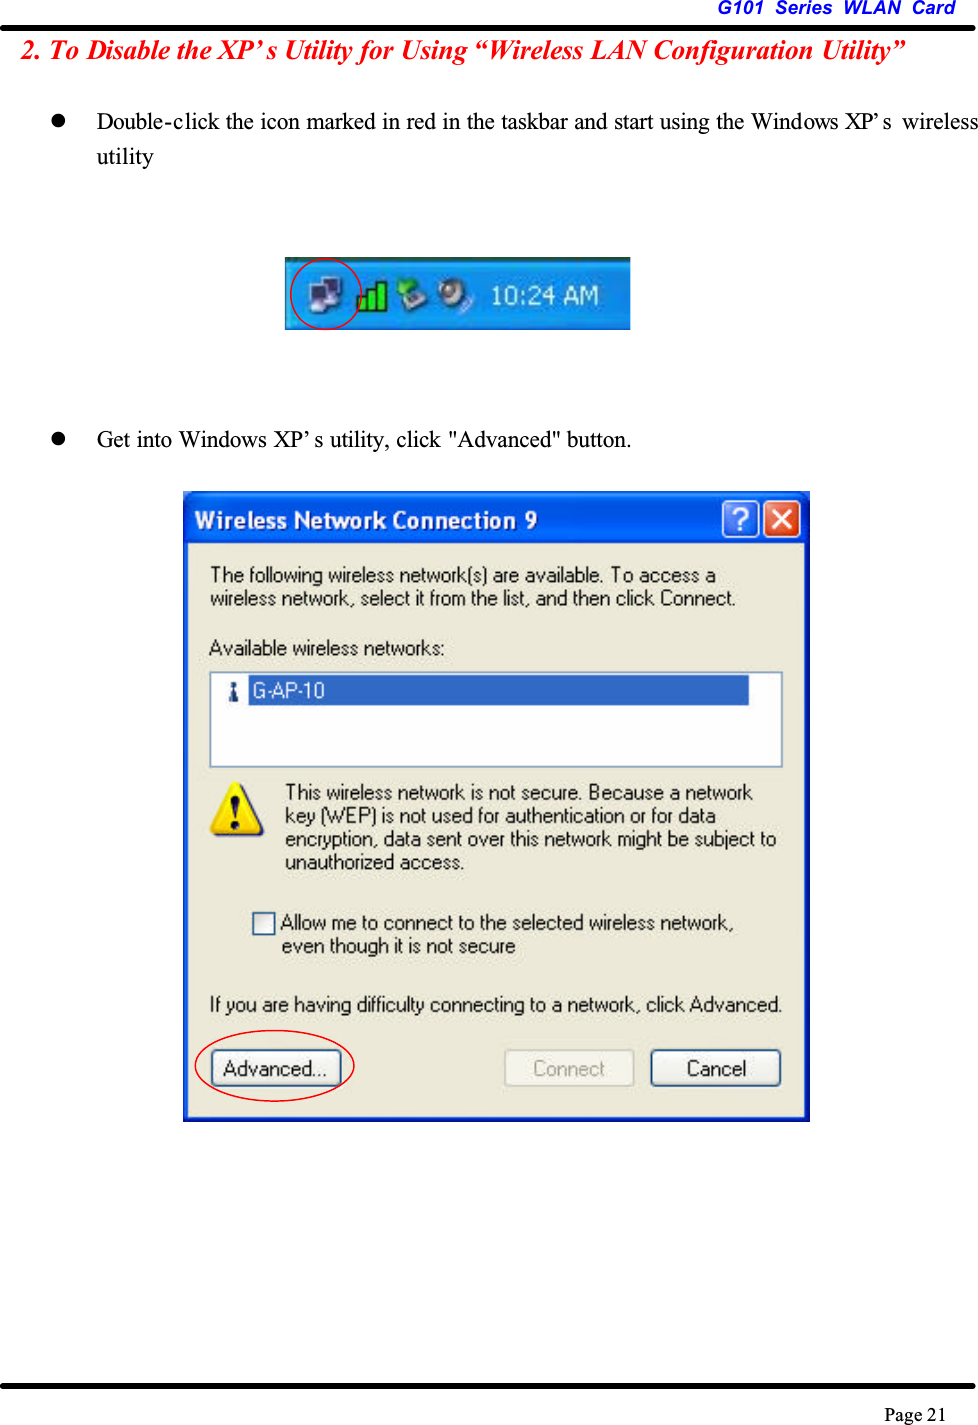 G101 Series WLAN CardPage 212. To Disable the XP’ s Utility for Using “Wireless LAN Configuration Utility”zDouble-click the icon marked in red in the taskbar and start using the Windows XP’ s wirelessutilityzGet into Windows XP’ s utility, click &quot;Advanced&quot; button.